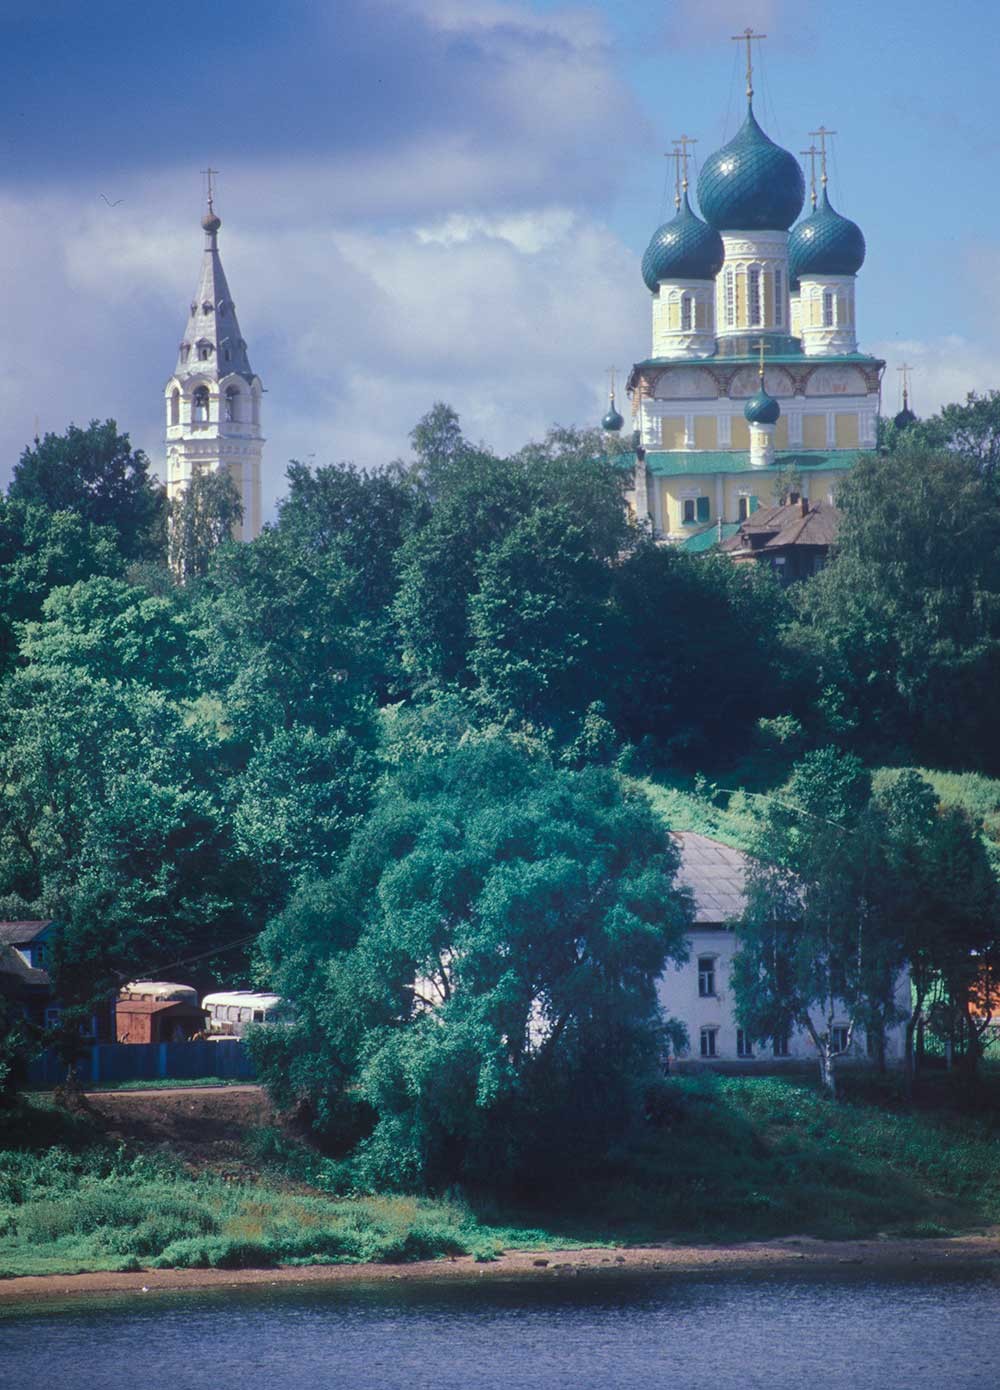 Cathedral of the Resurrection & bell tower. East view from Volga River. July 15, 2007